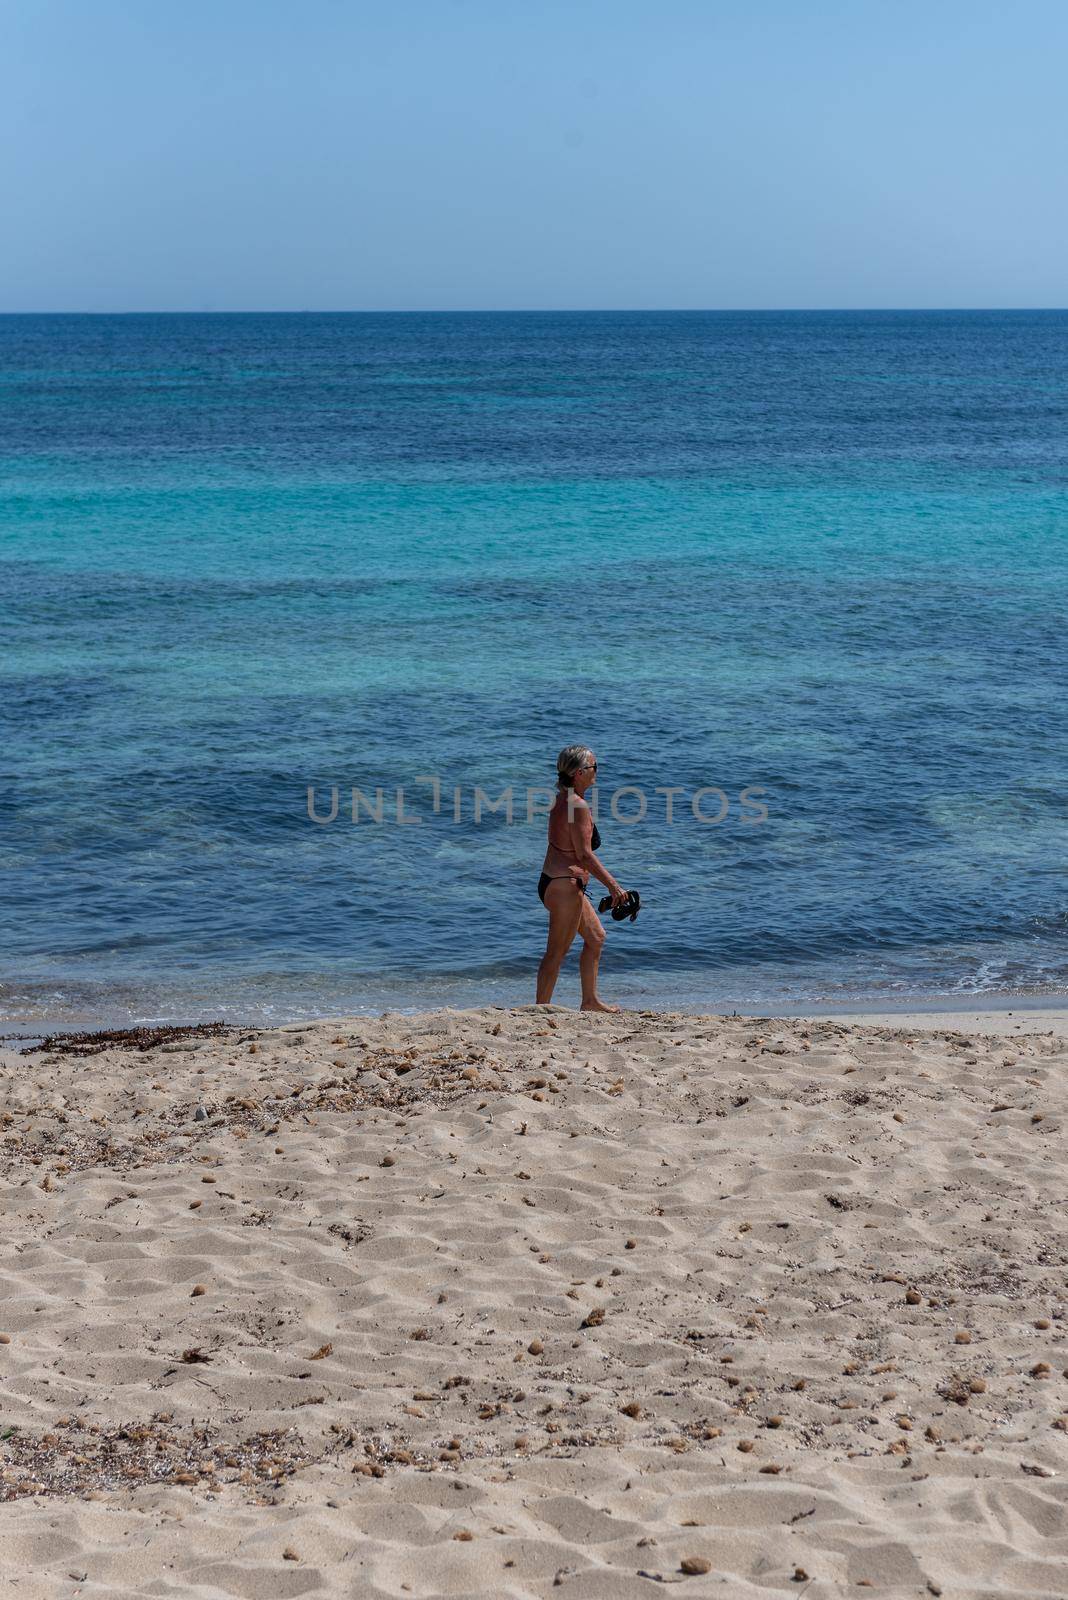 Formentera, Spain: June 12, 2021: People on Migjorn beach in Formentera in Spain in Times of COvid 19